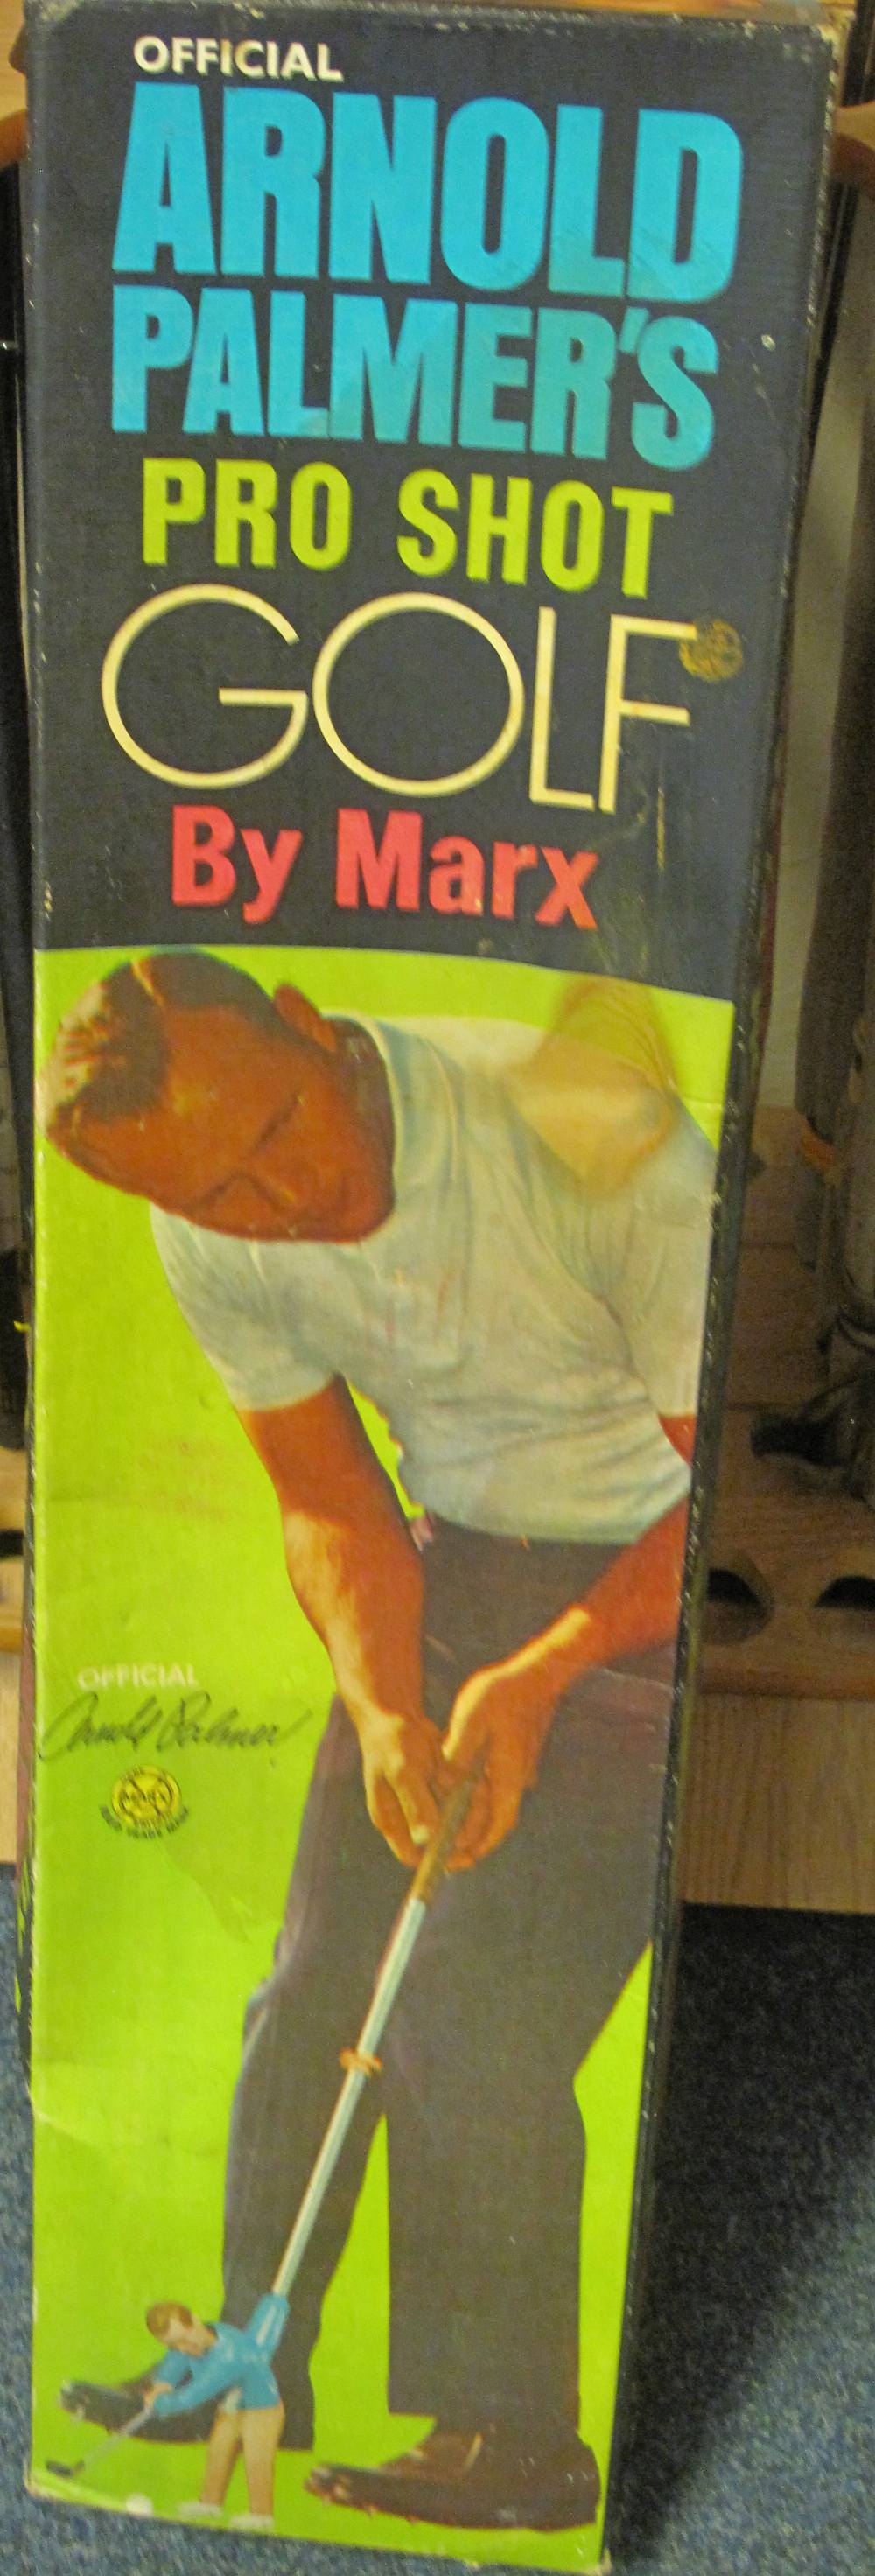 Marks Toys Official Arnold Palmer's Pro Shot Golf Game in original box. (B.P. 24% incl.